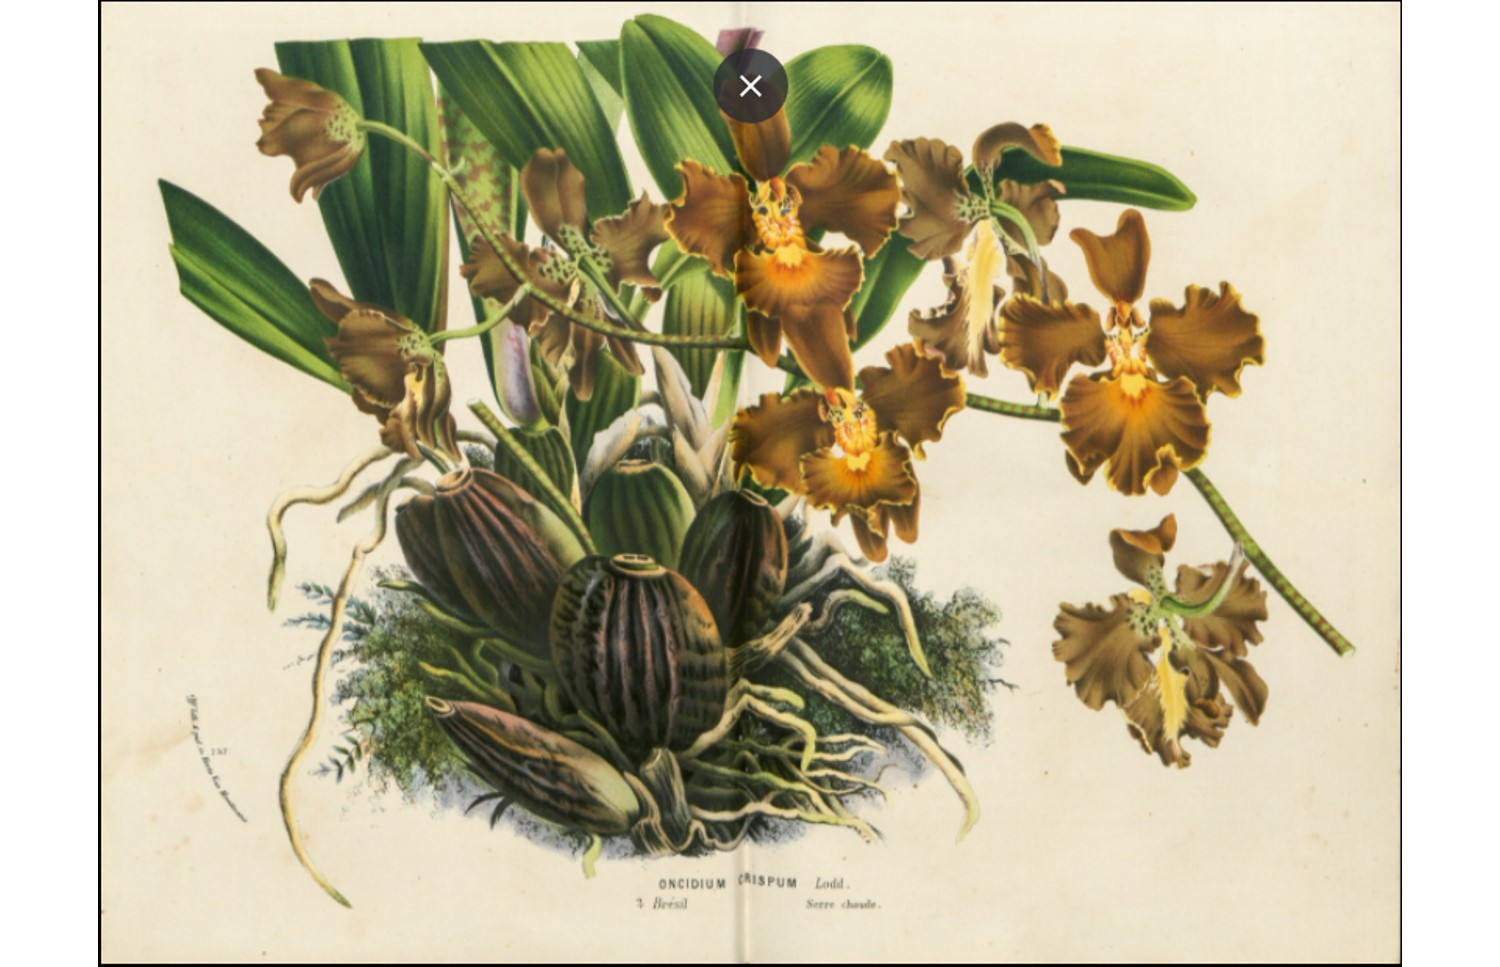 Oncidium crispum, an orchid endemic to Brazil, advertised in volume 21 of Flore des serres.